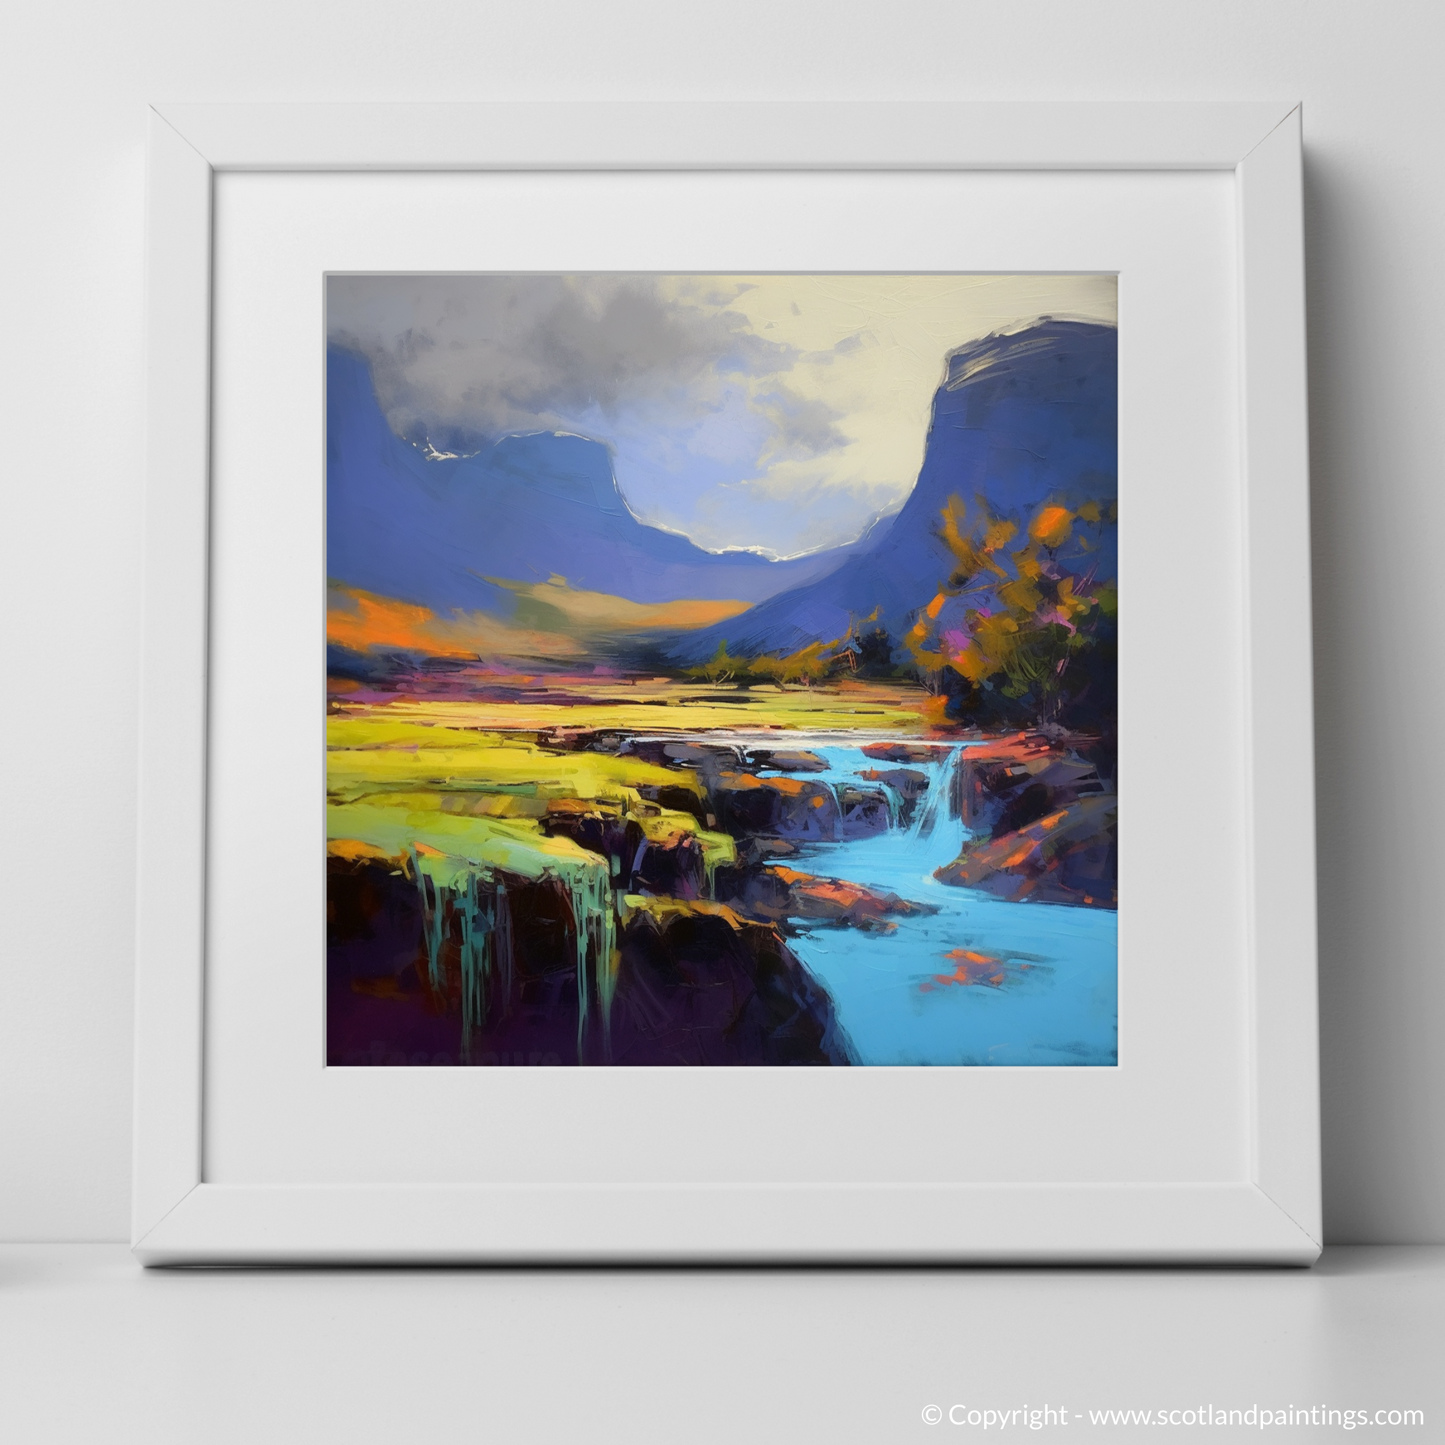 Storm over Skye's Fairy Pools: An Expressionist Ode to Scotland's Summer Majesty